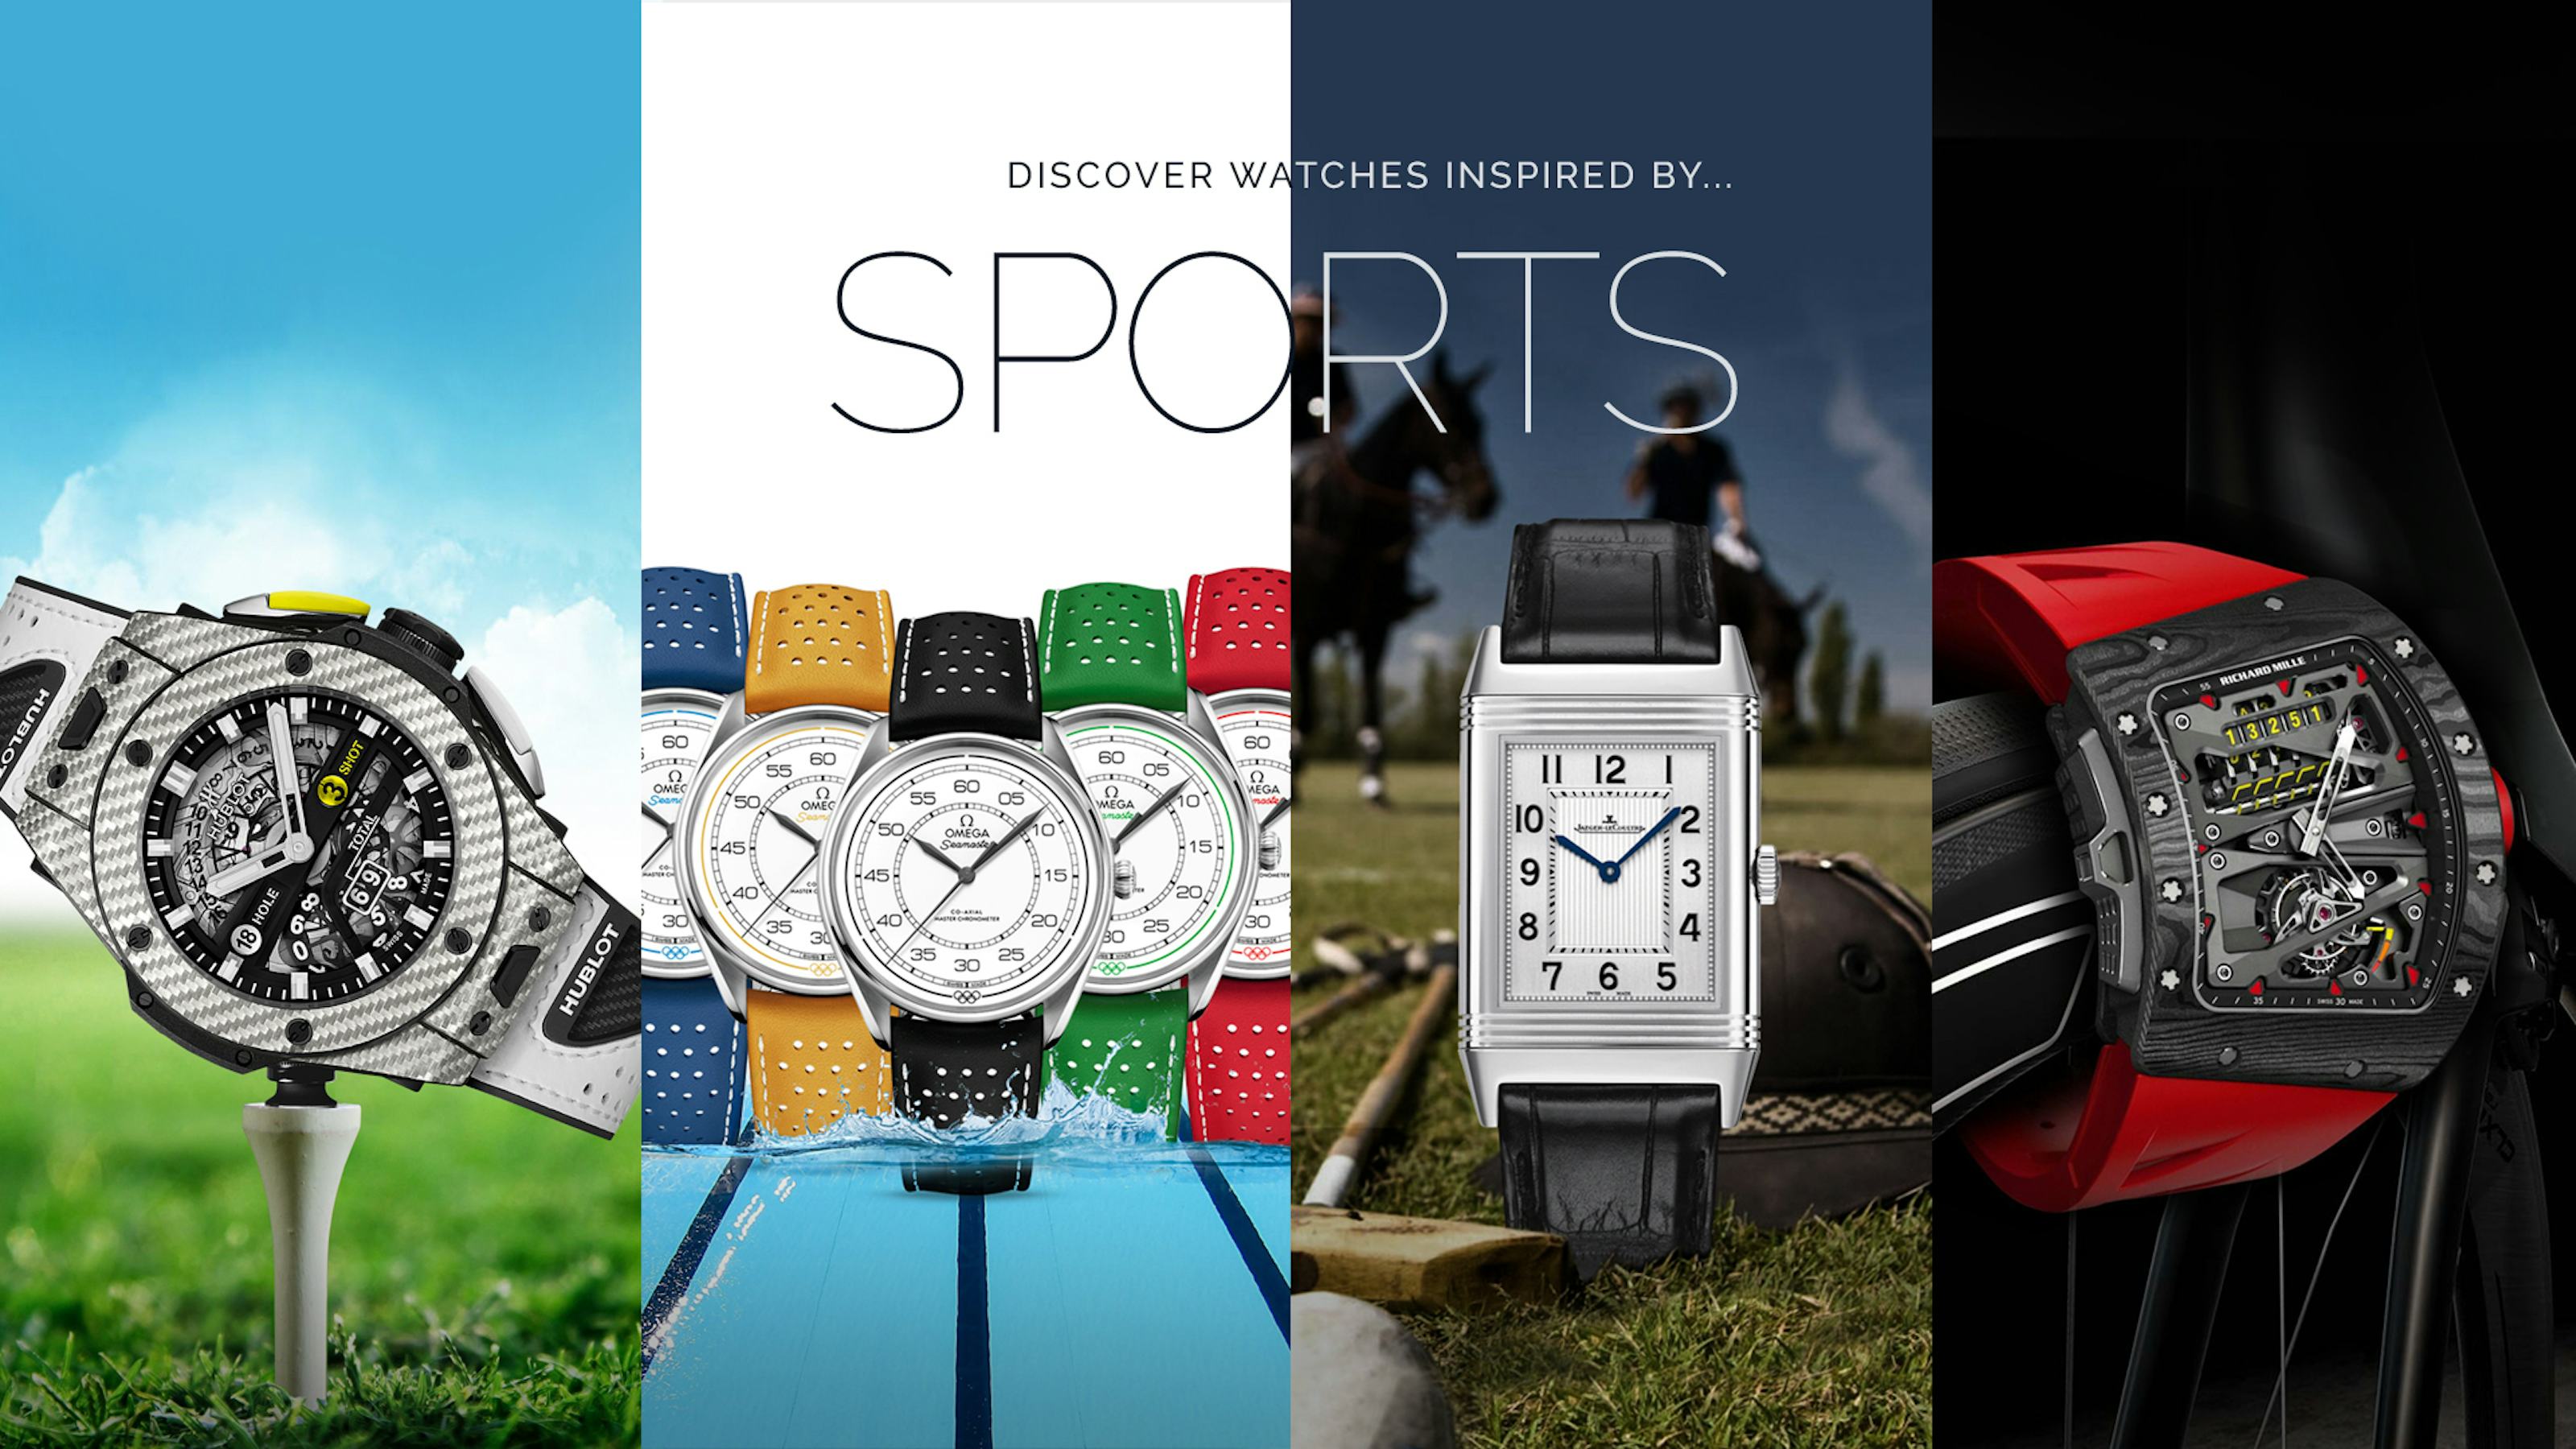 Watches Inspired by Sports